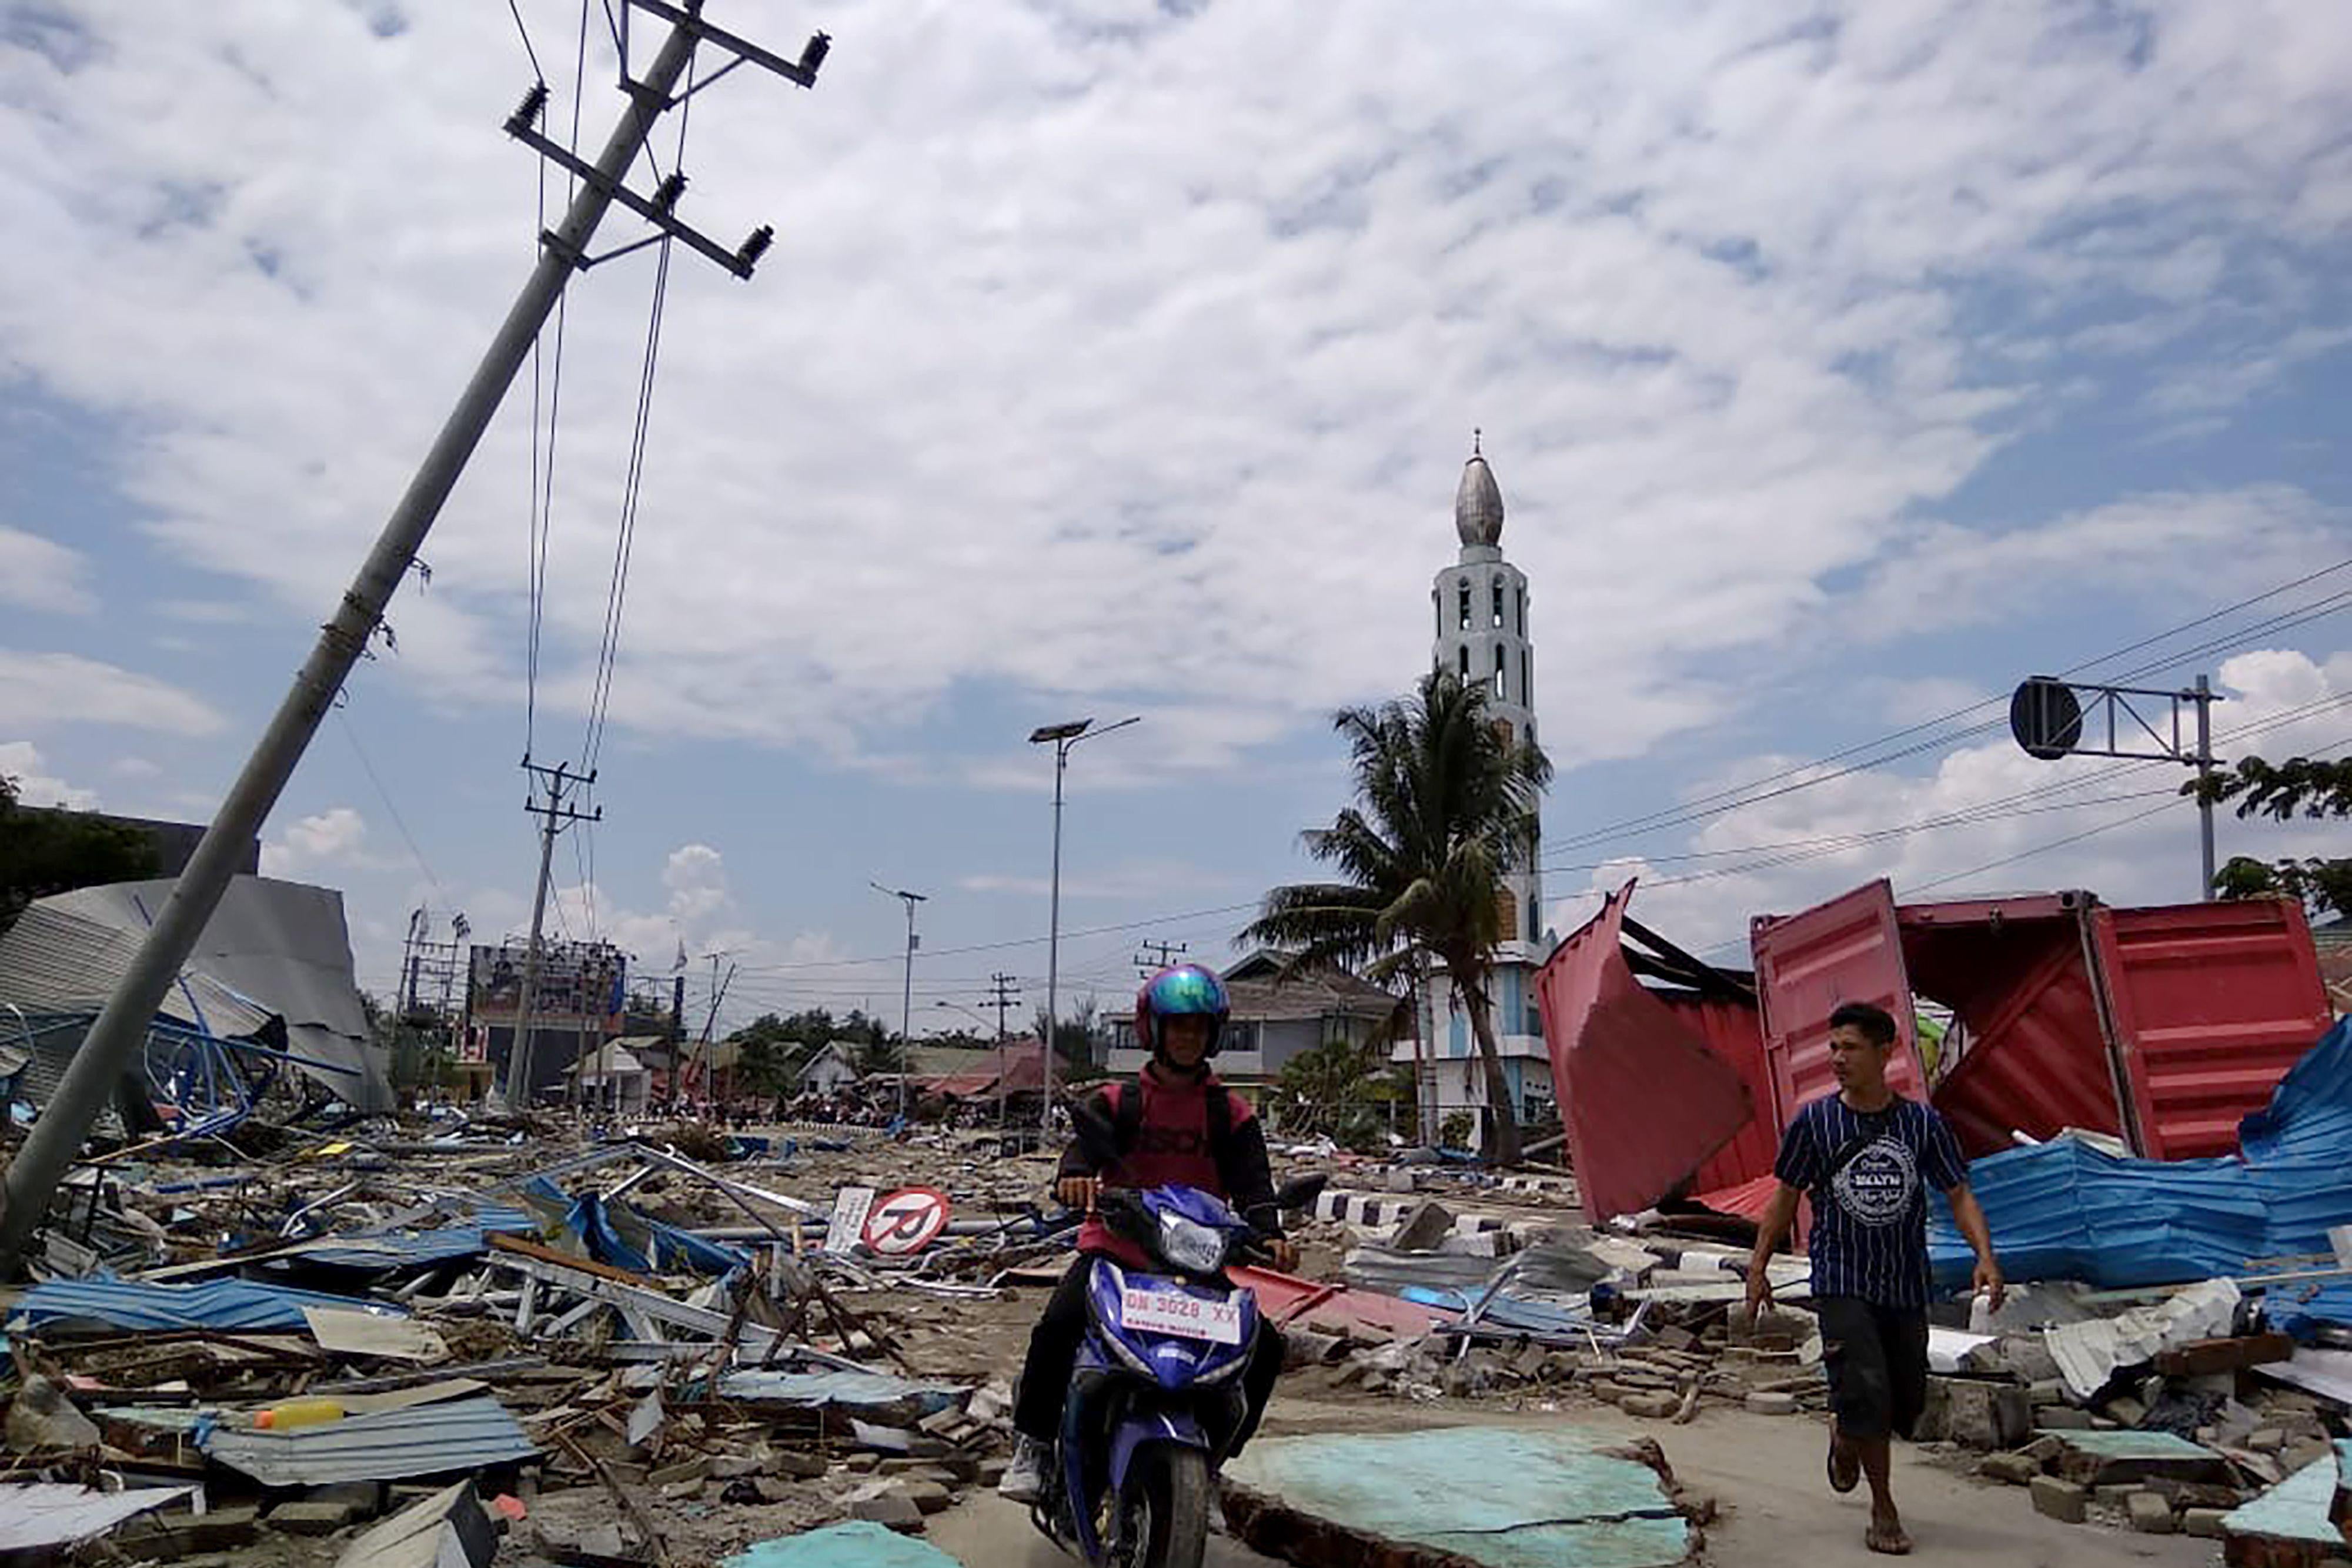 Residents make their way along a street full of debris after an earthquake and tsunami hit Palu.